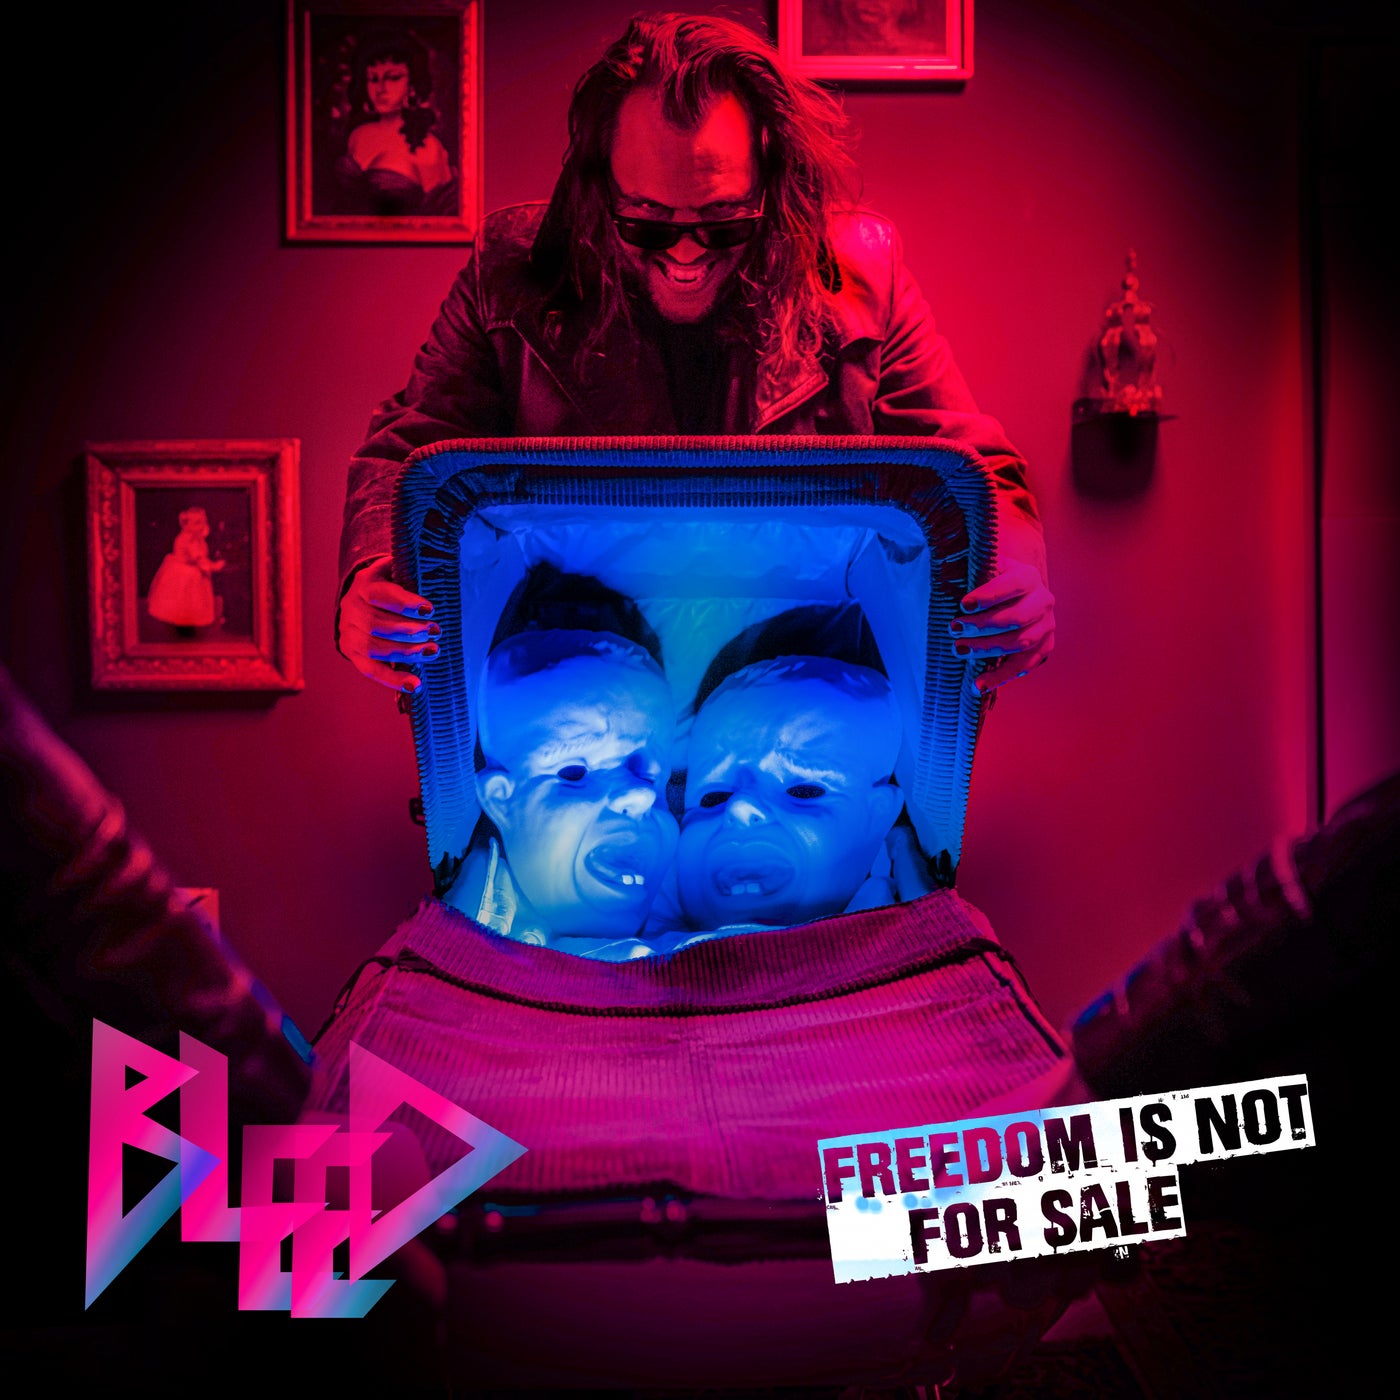 FREEDOM IS NOT FOR SALE